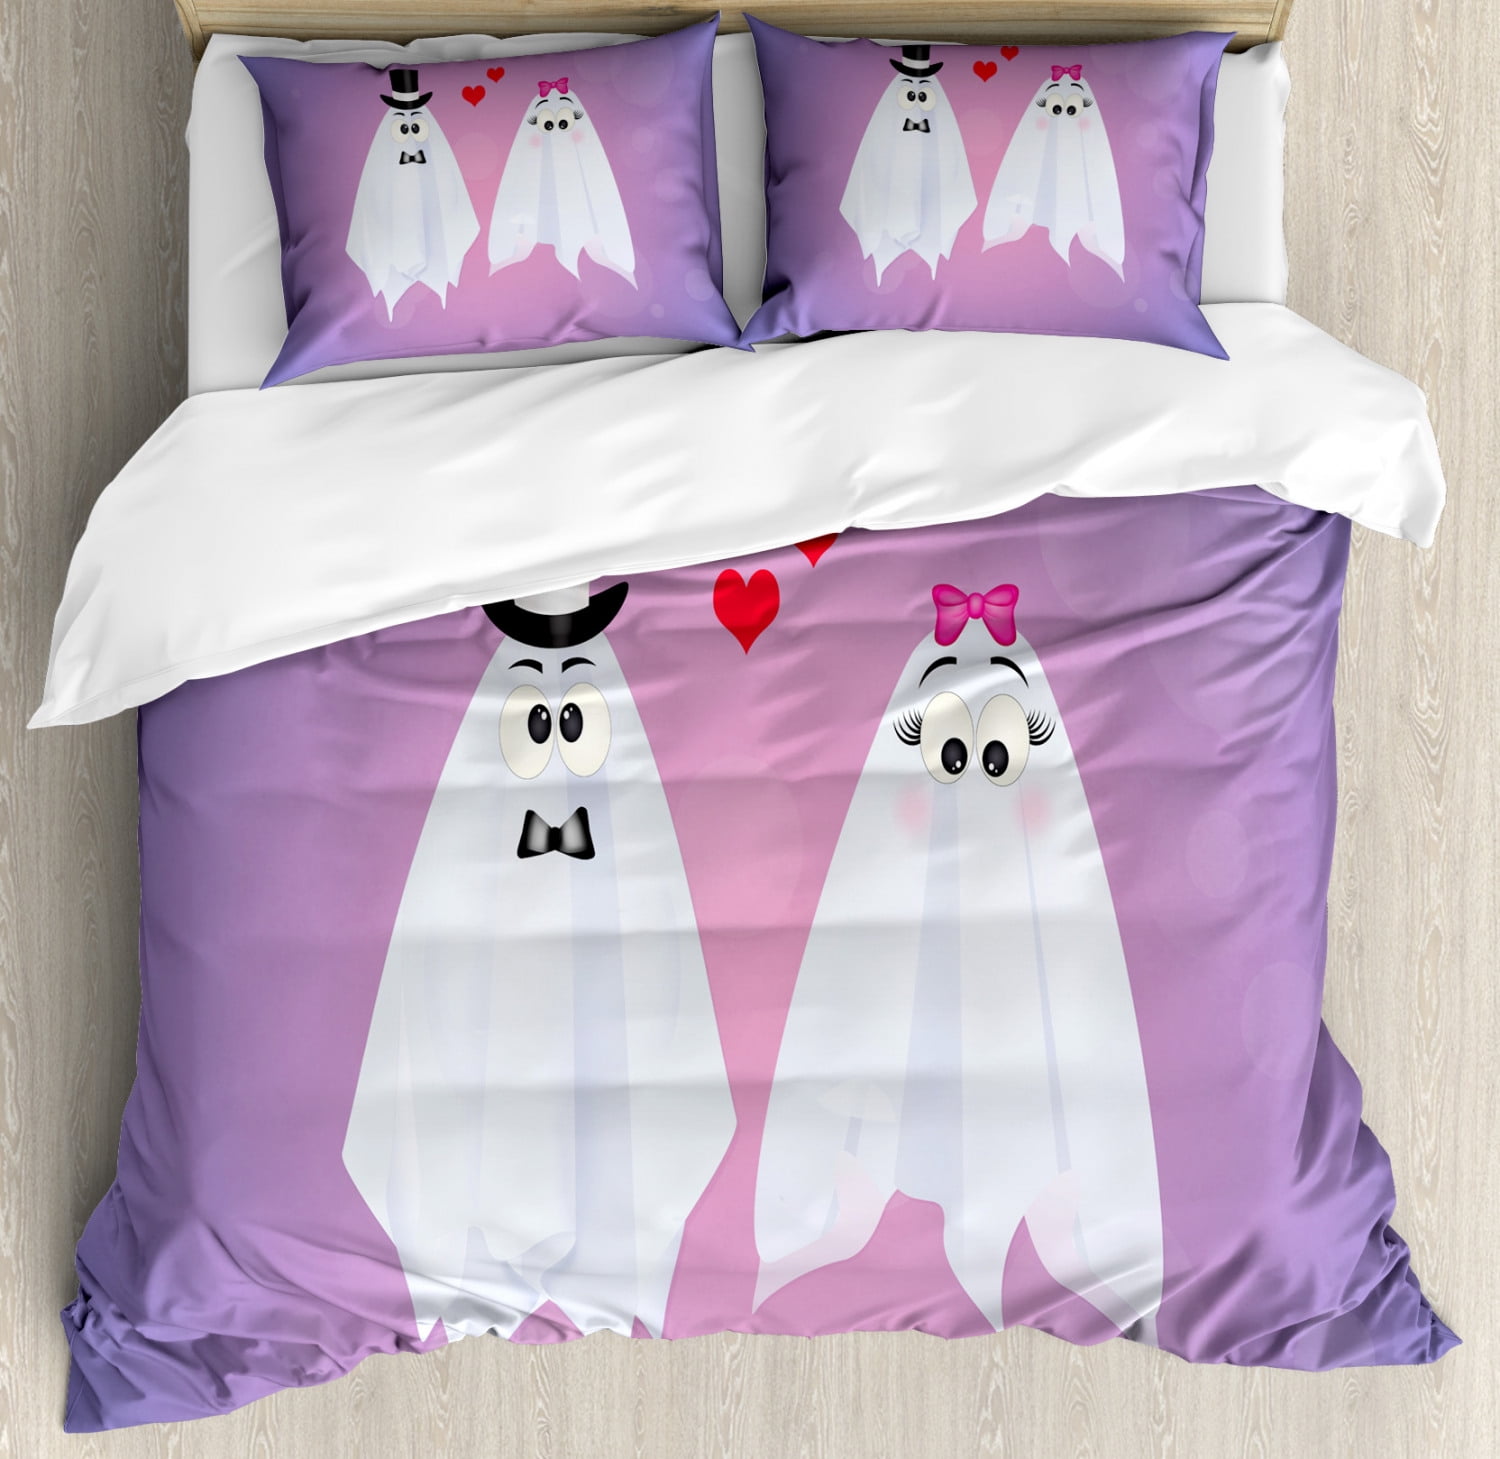 Ghost Duvet Cover Set King Size Funny Ghost Couple Wedding Of